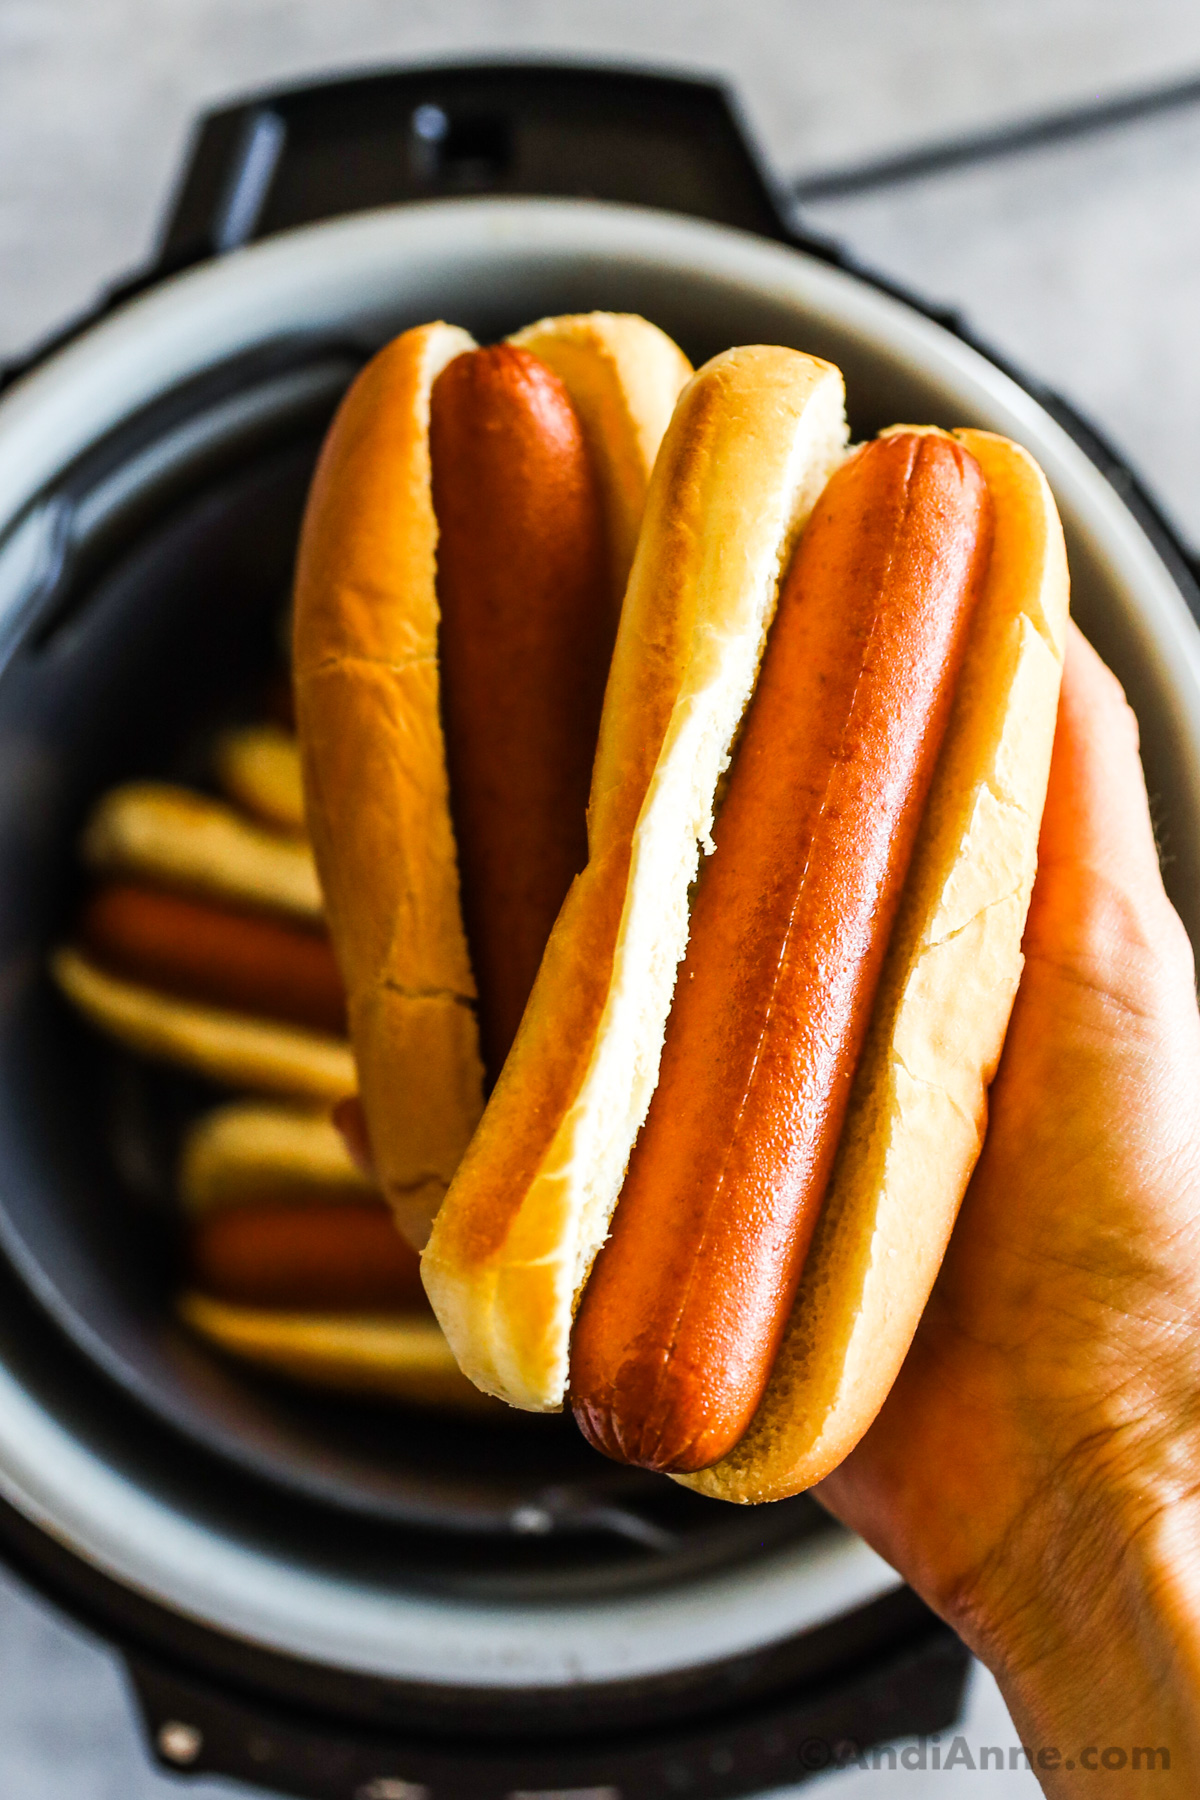 A hand holding two hot dogs with buns above an air fryer.